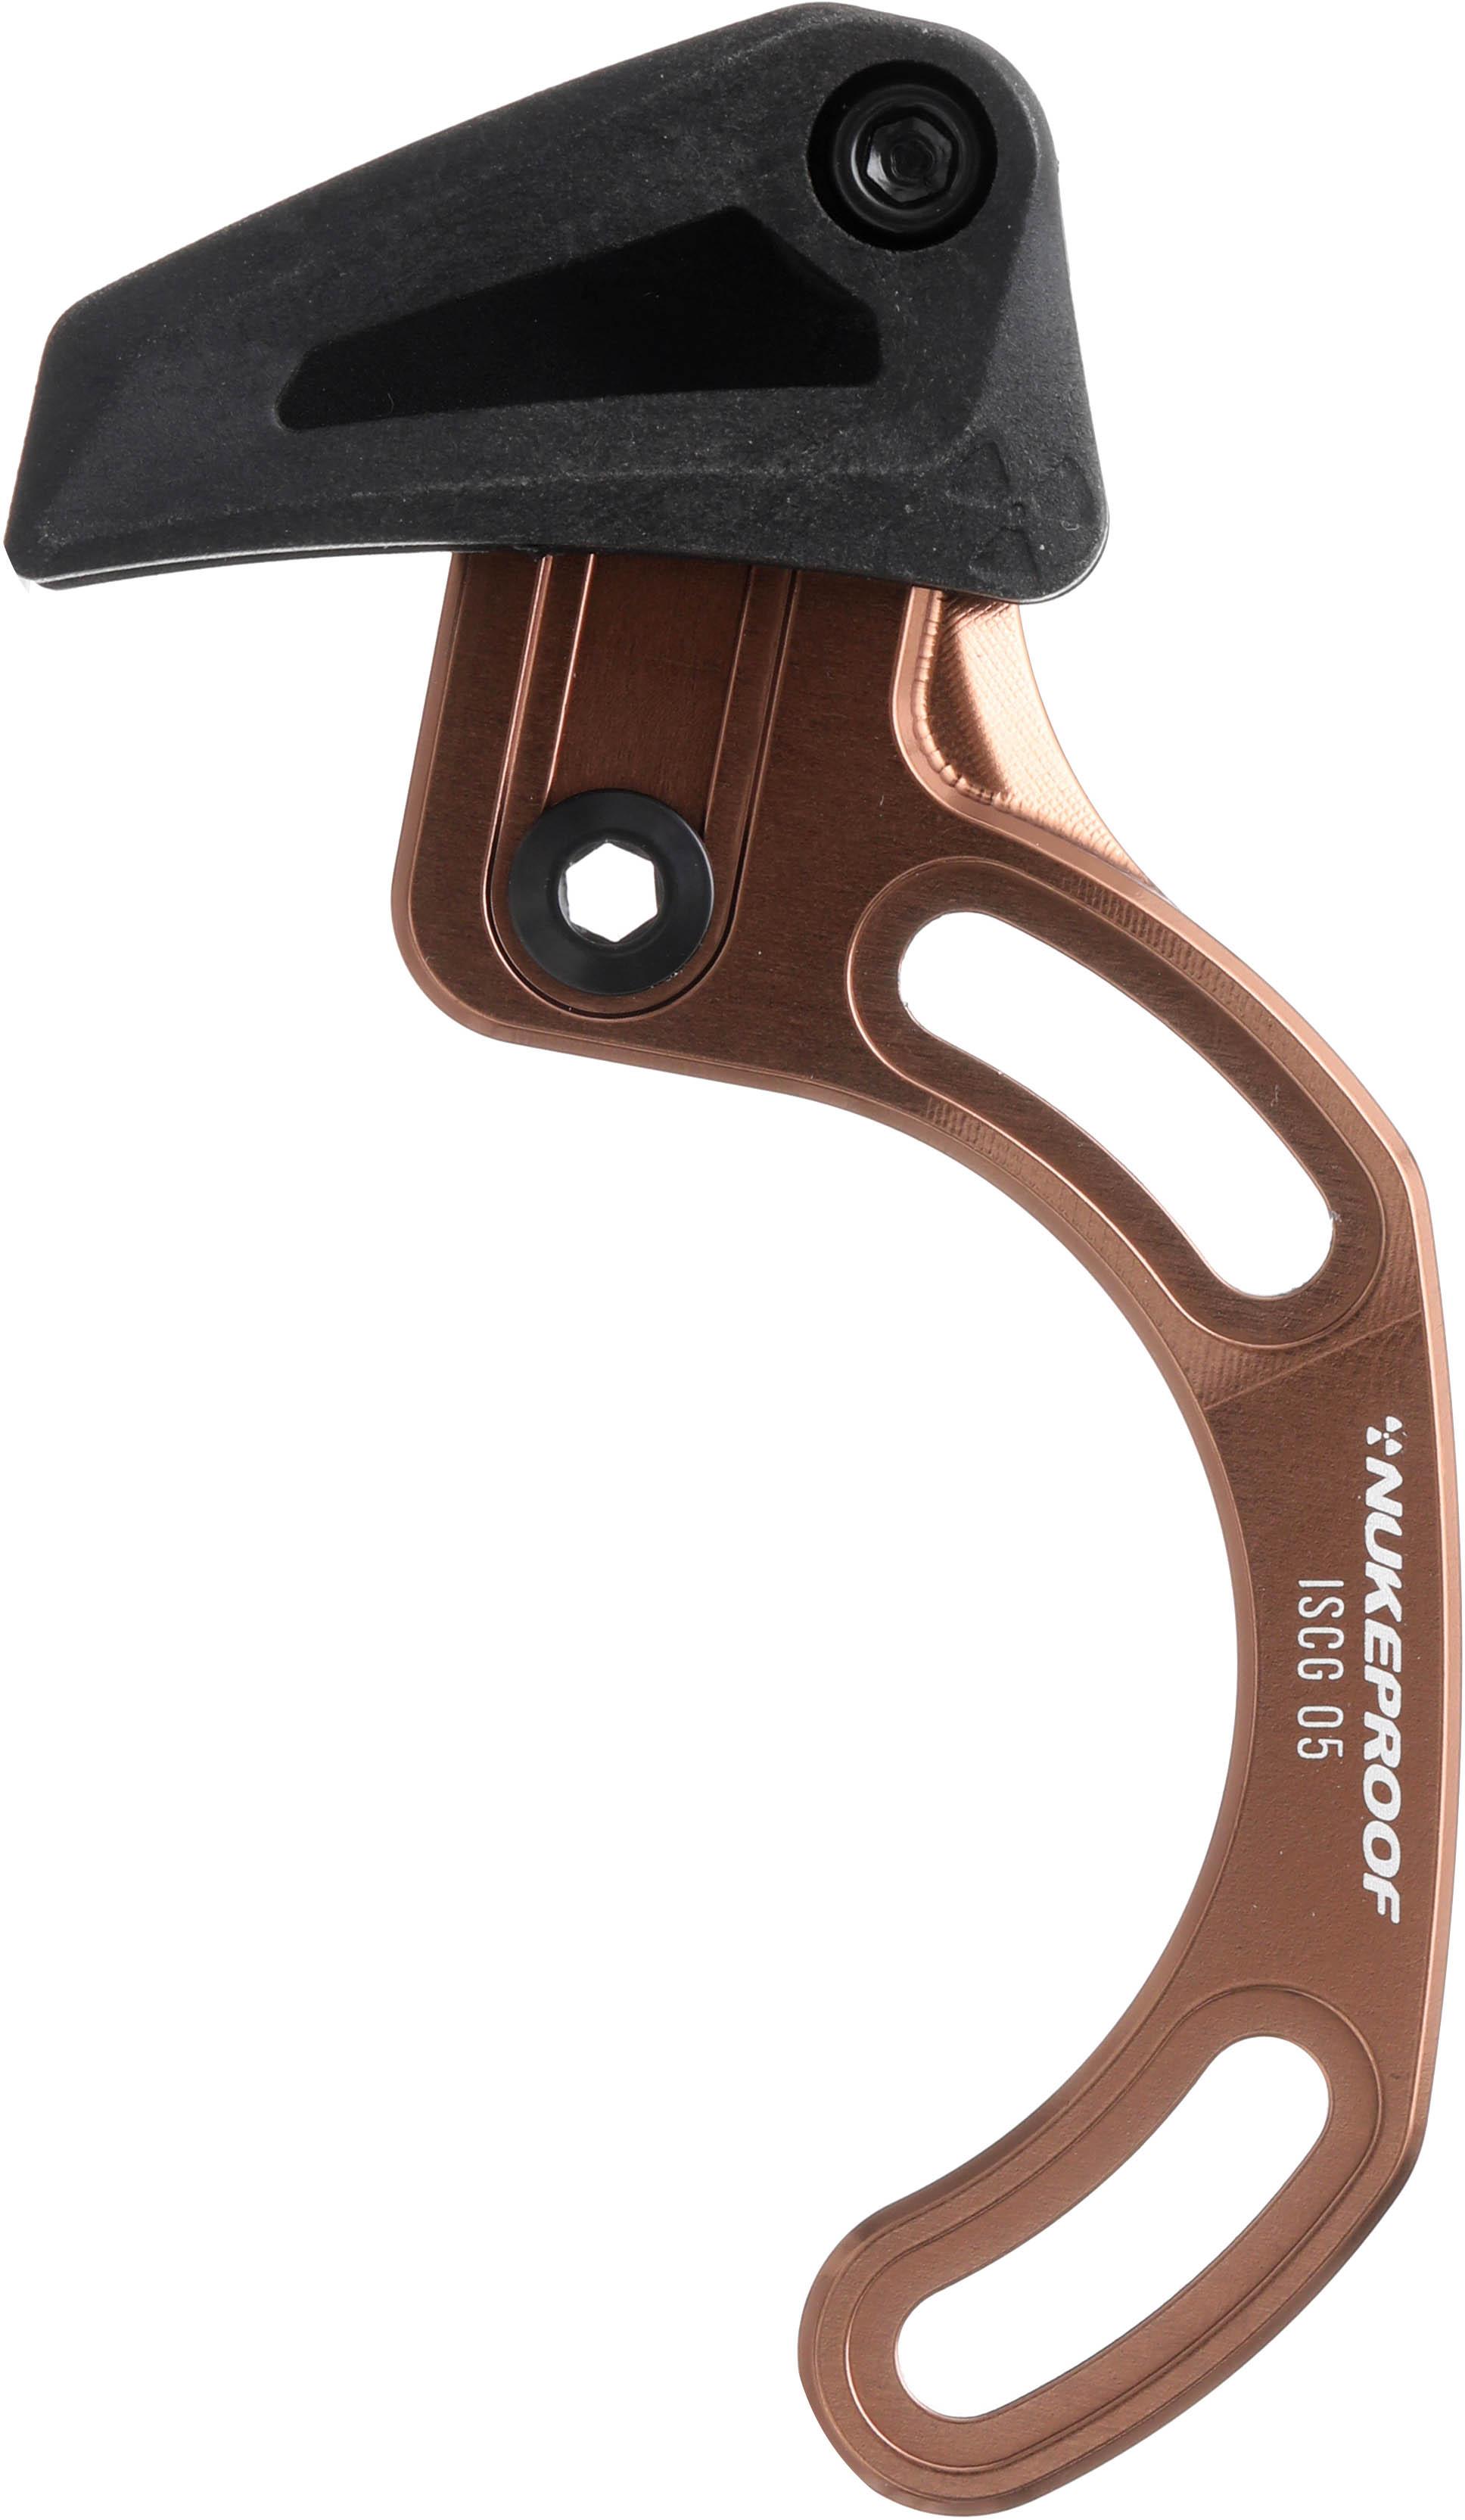 Nukeproof Chain Guide Iscg 05 Top Guide - Copper/black